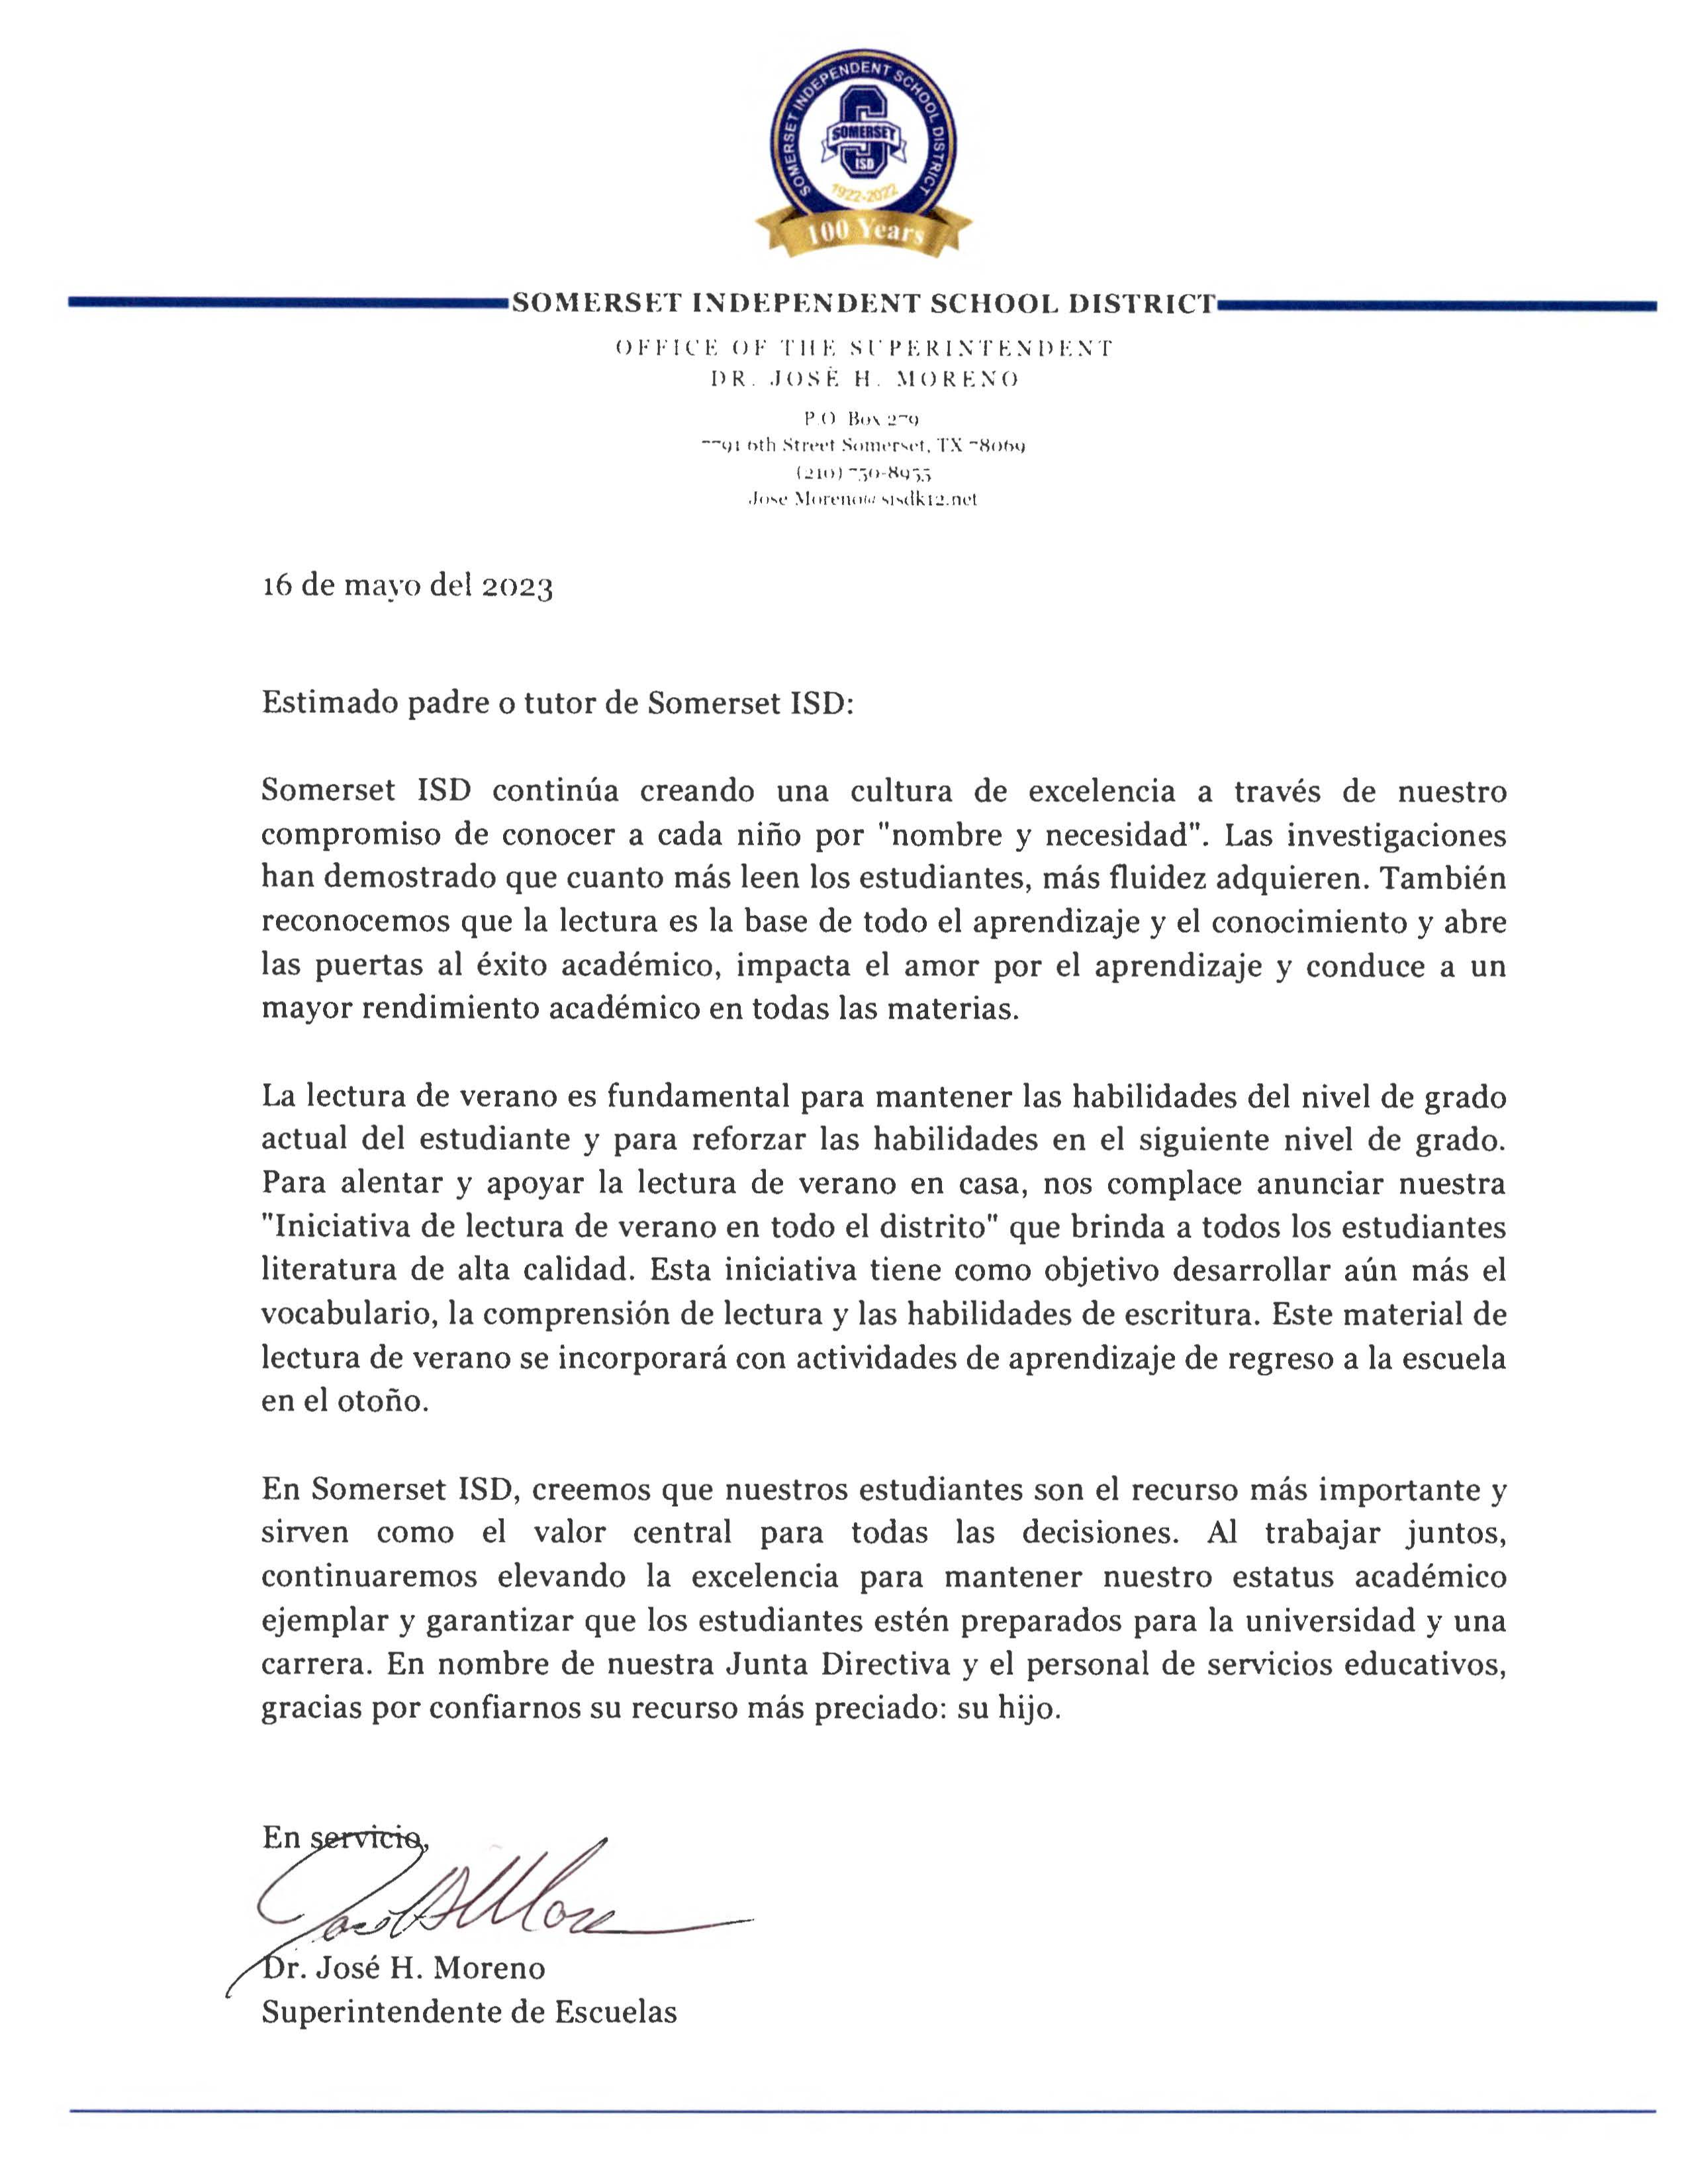 Letter from Dr. Moreno